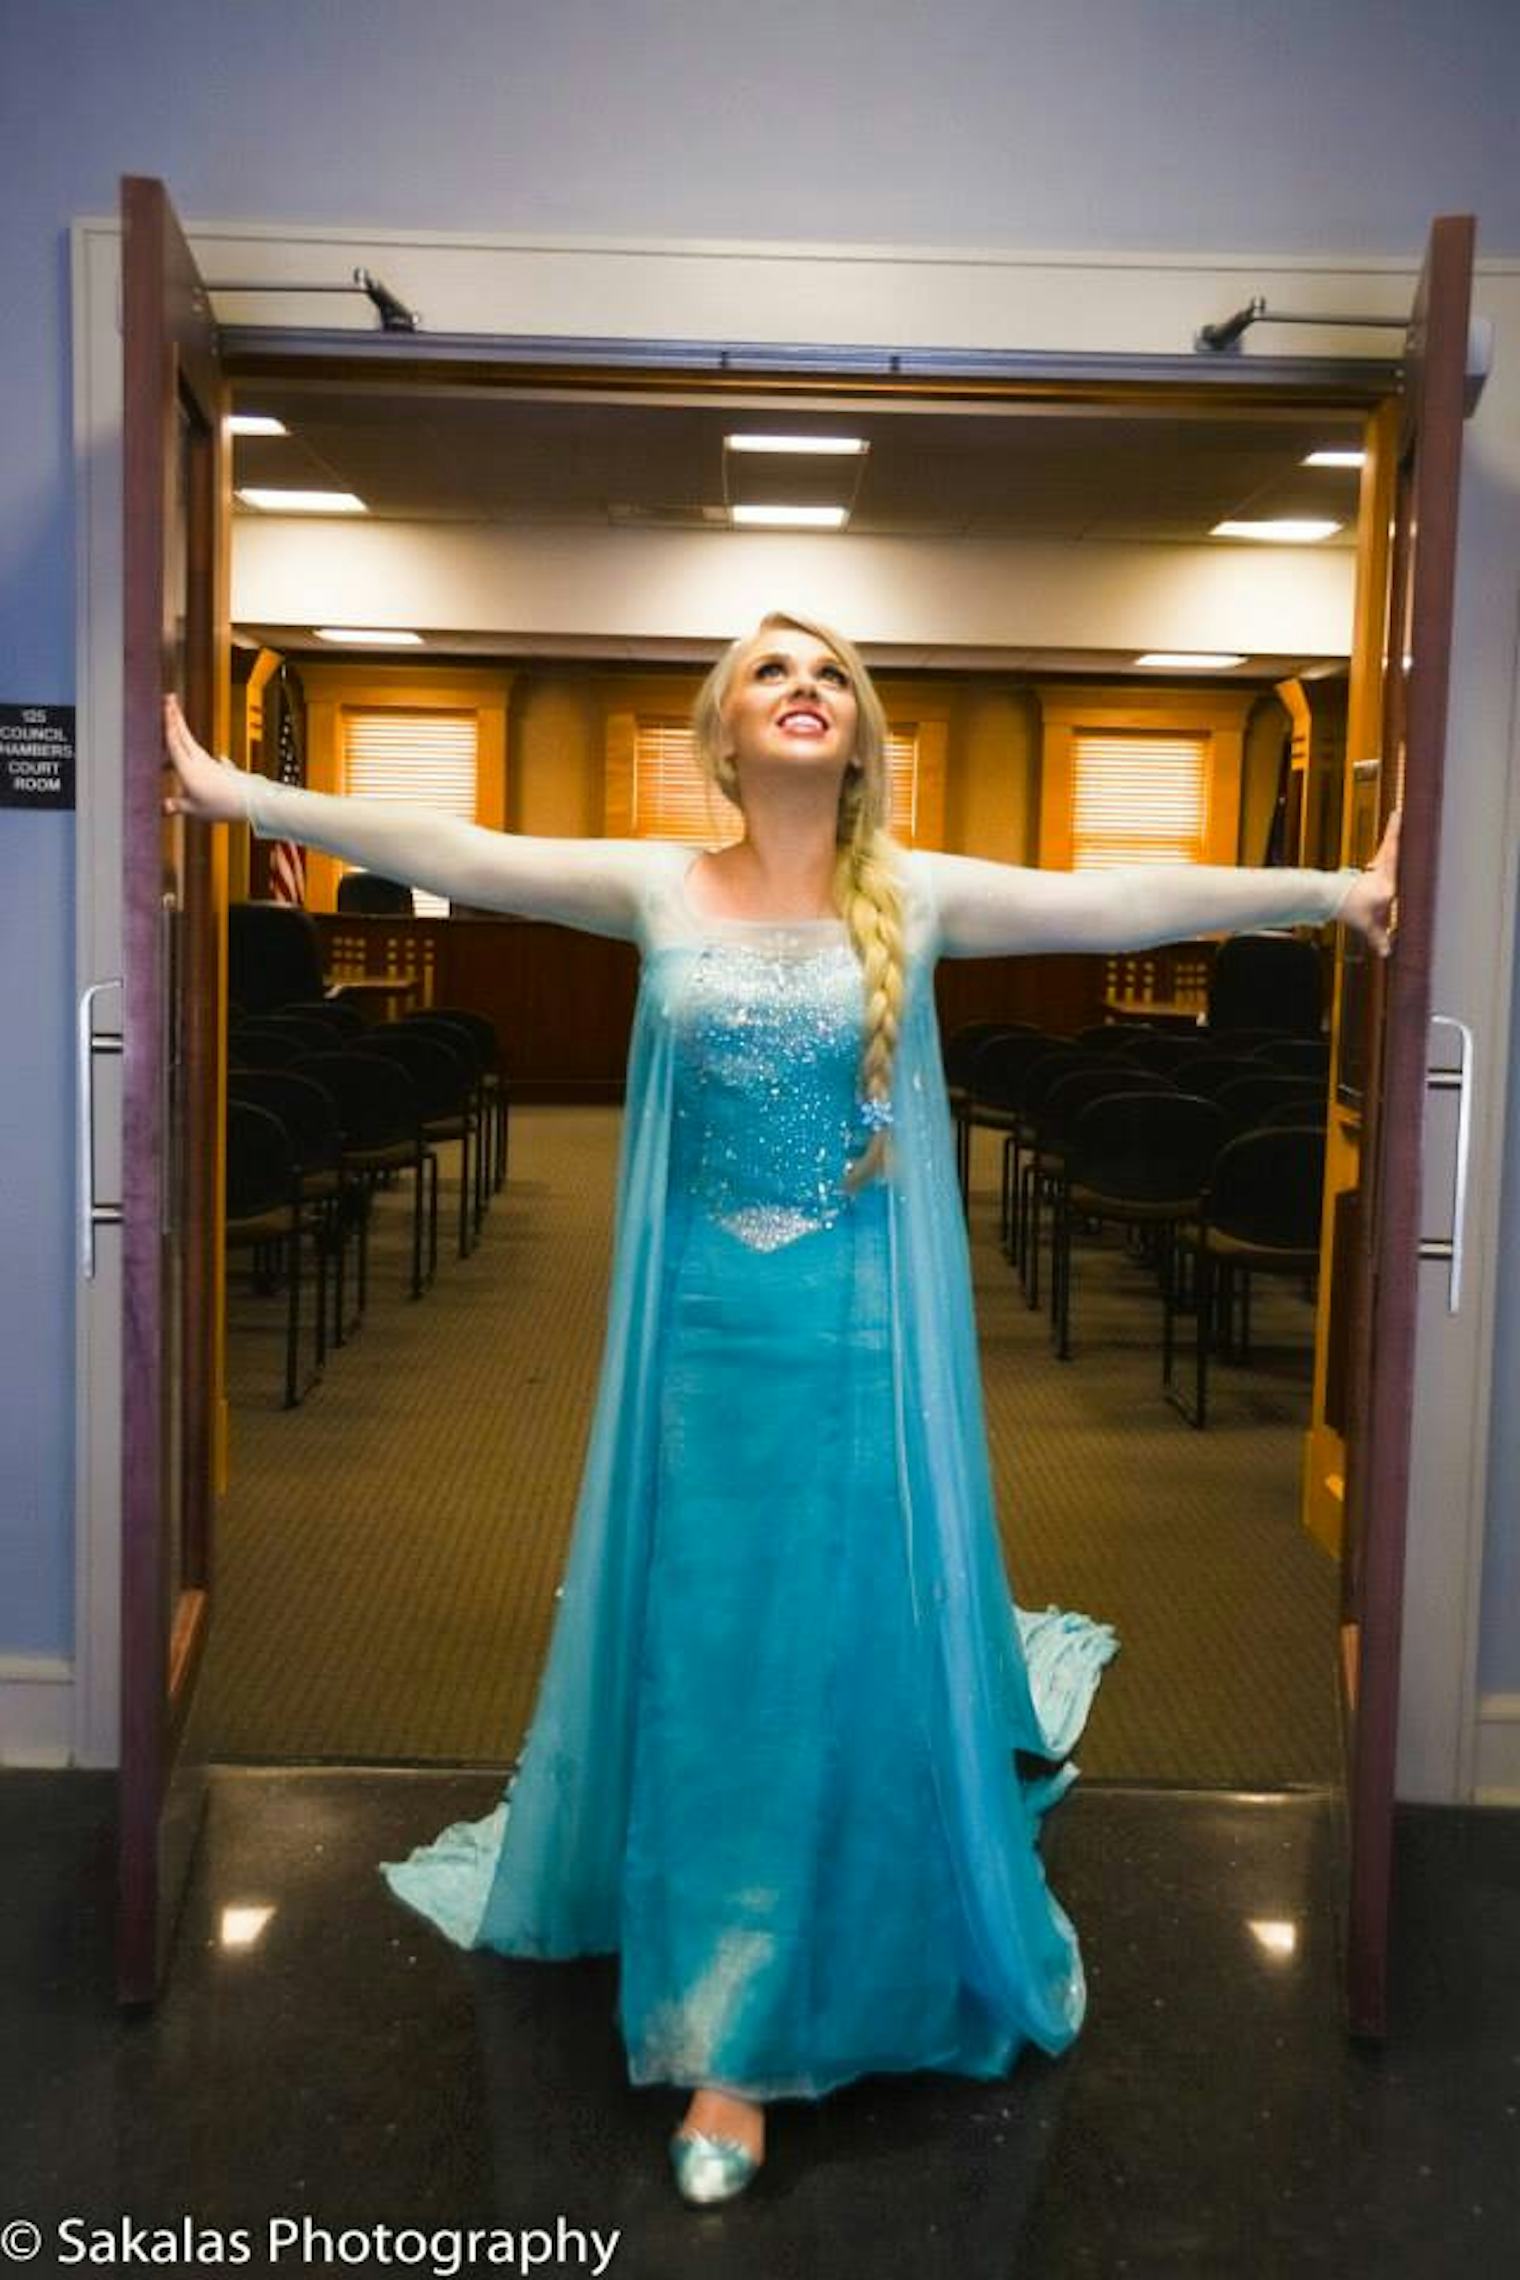 Queen Elsa Has Been Arrested In South Carolina And We Ve Got The Pics To Prove It